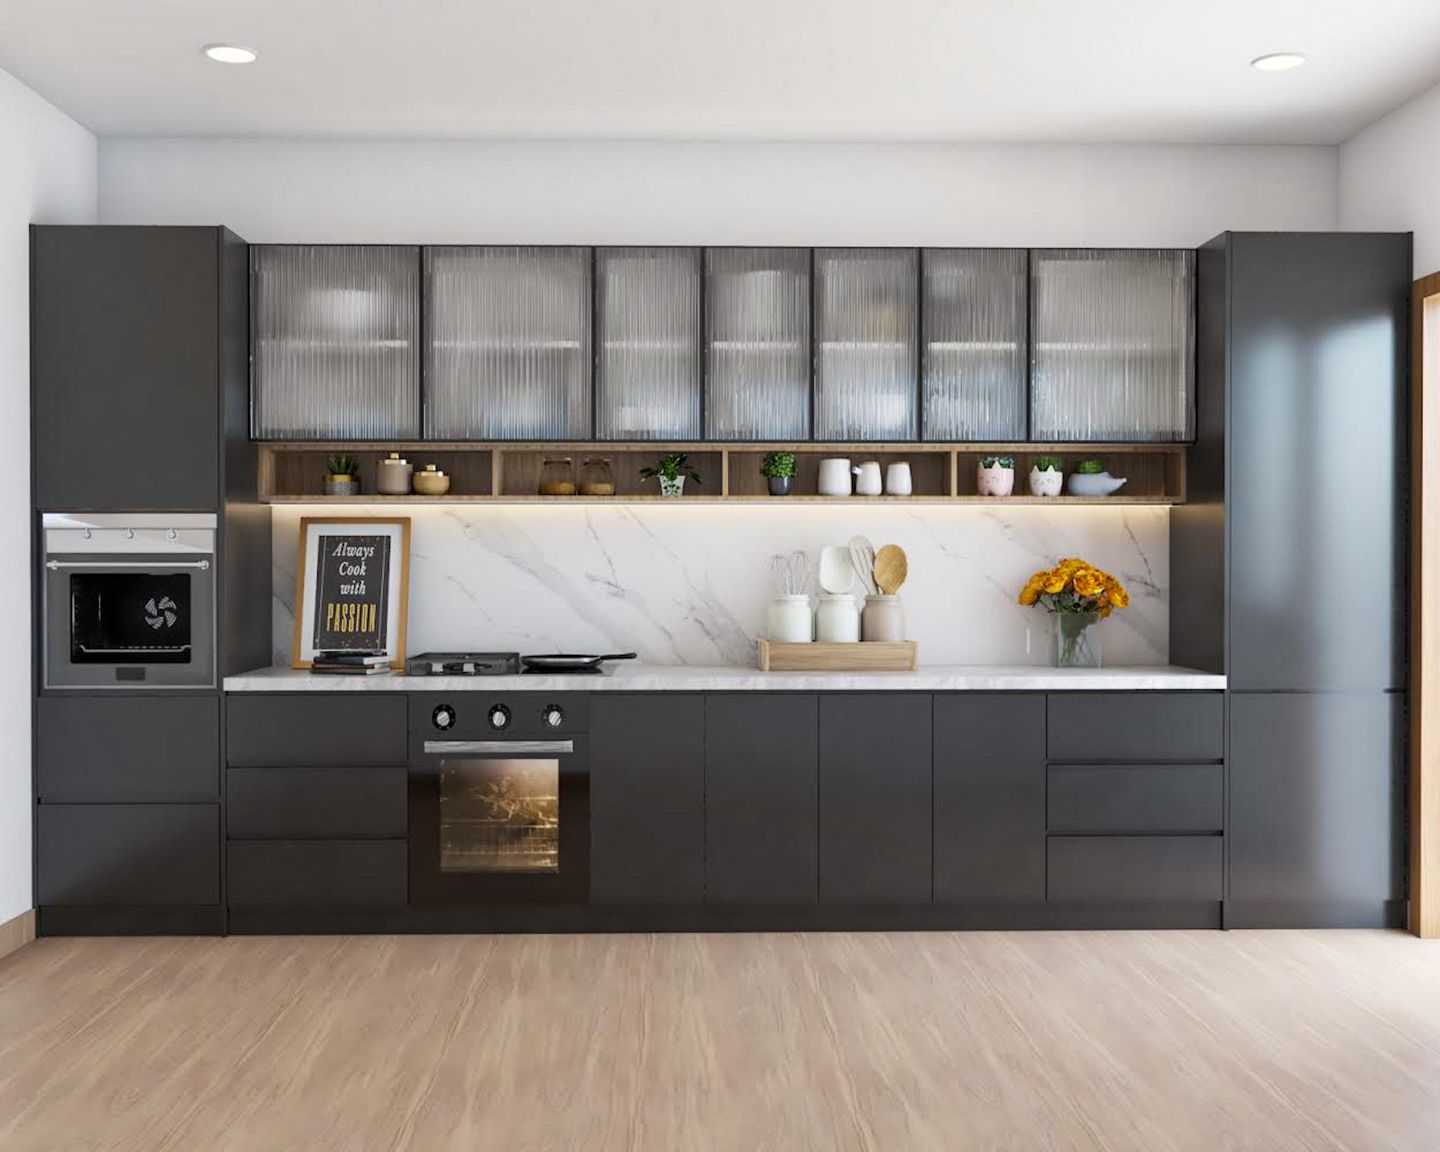 Straight Black Kitchen Design With Fluted Glass Shutters - Livspace